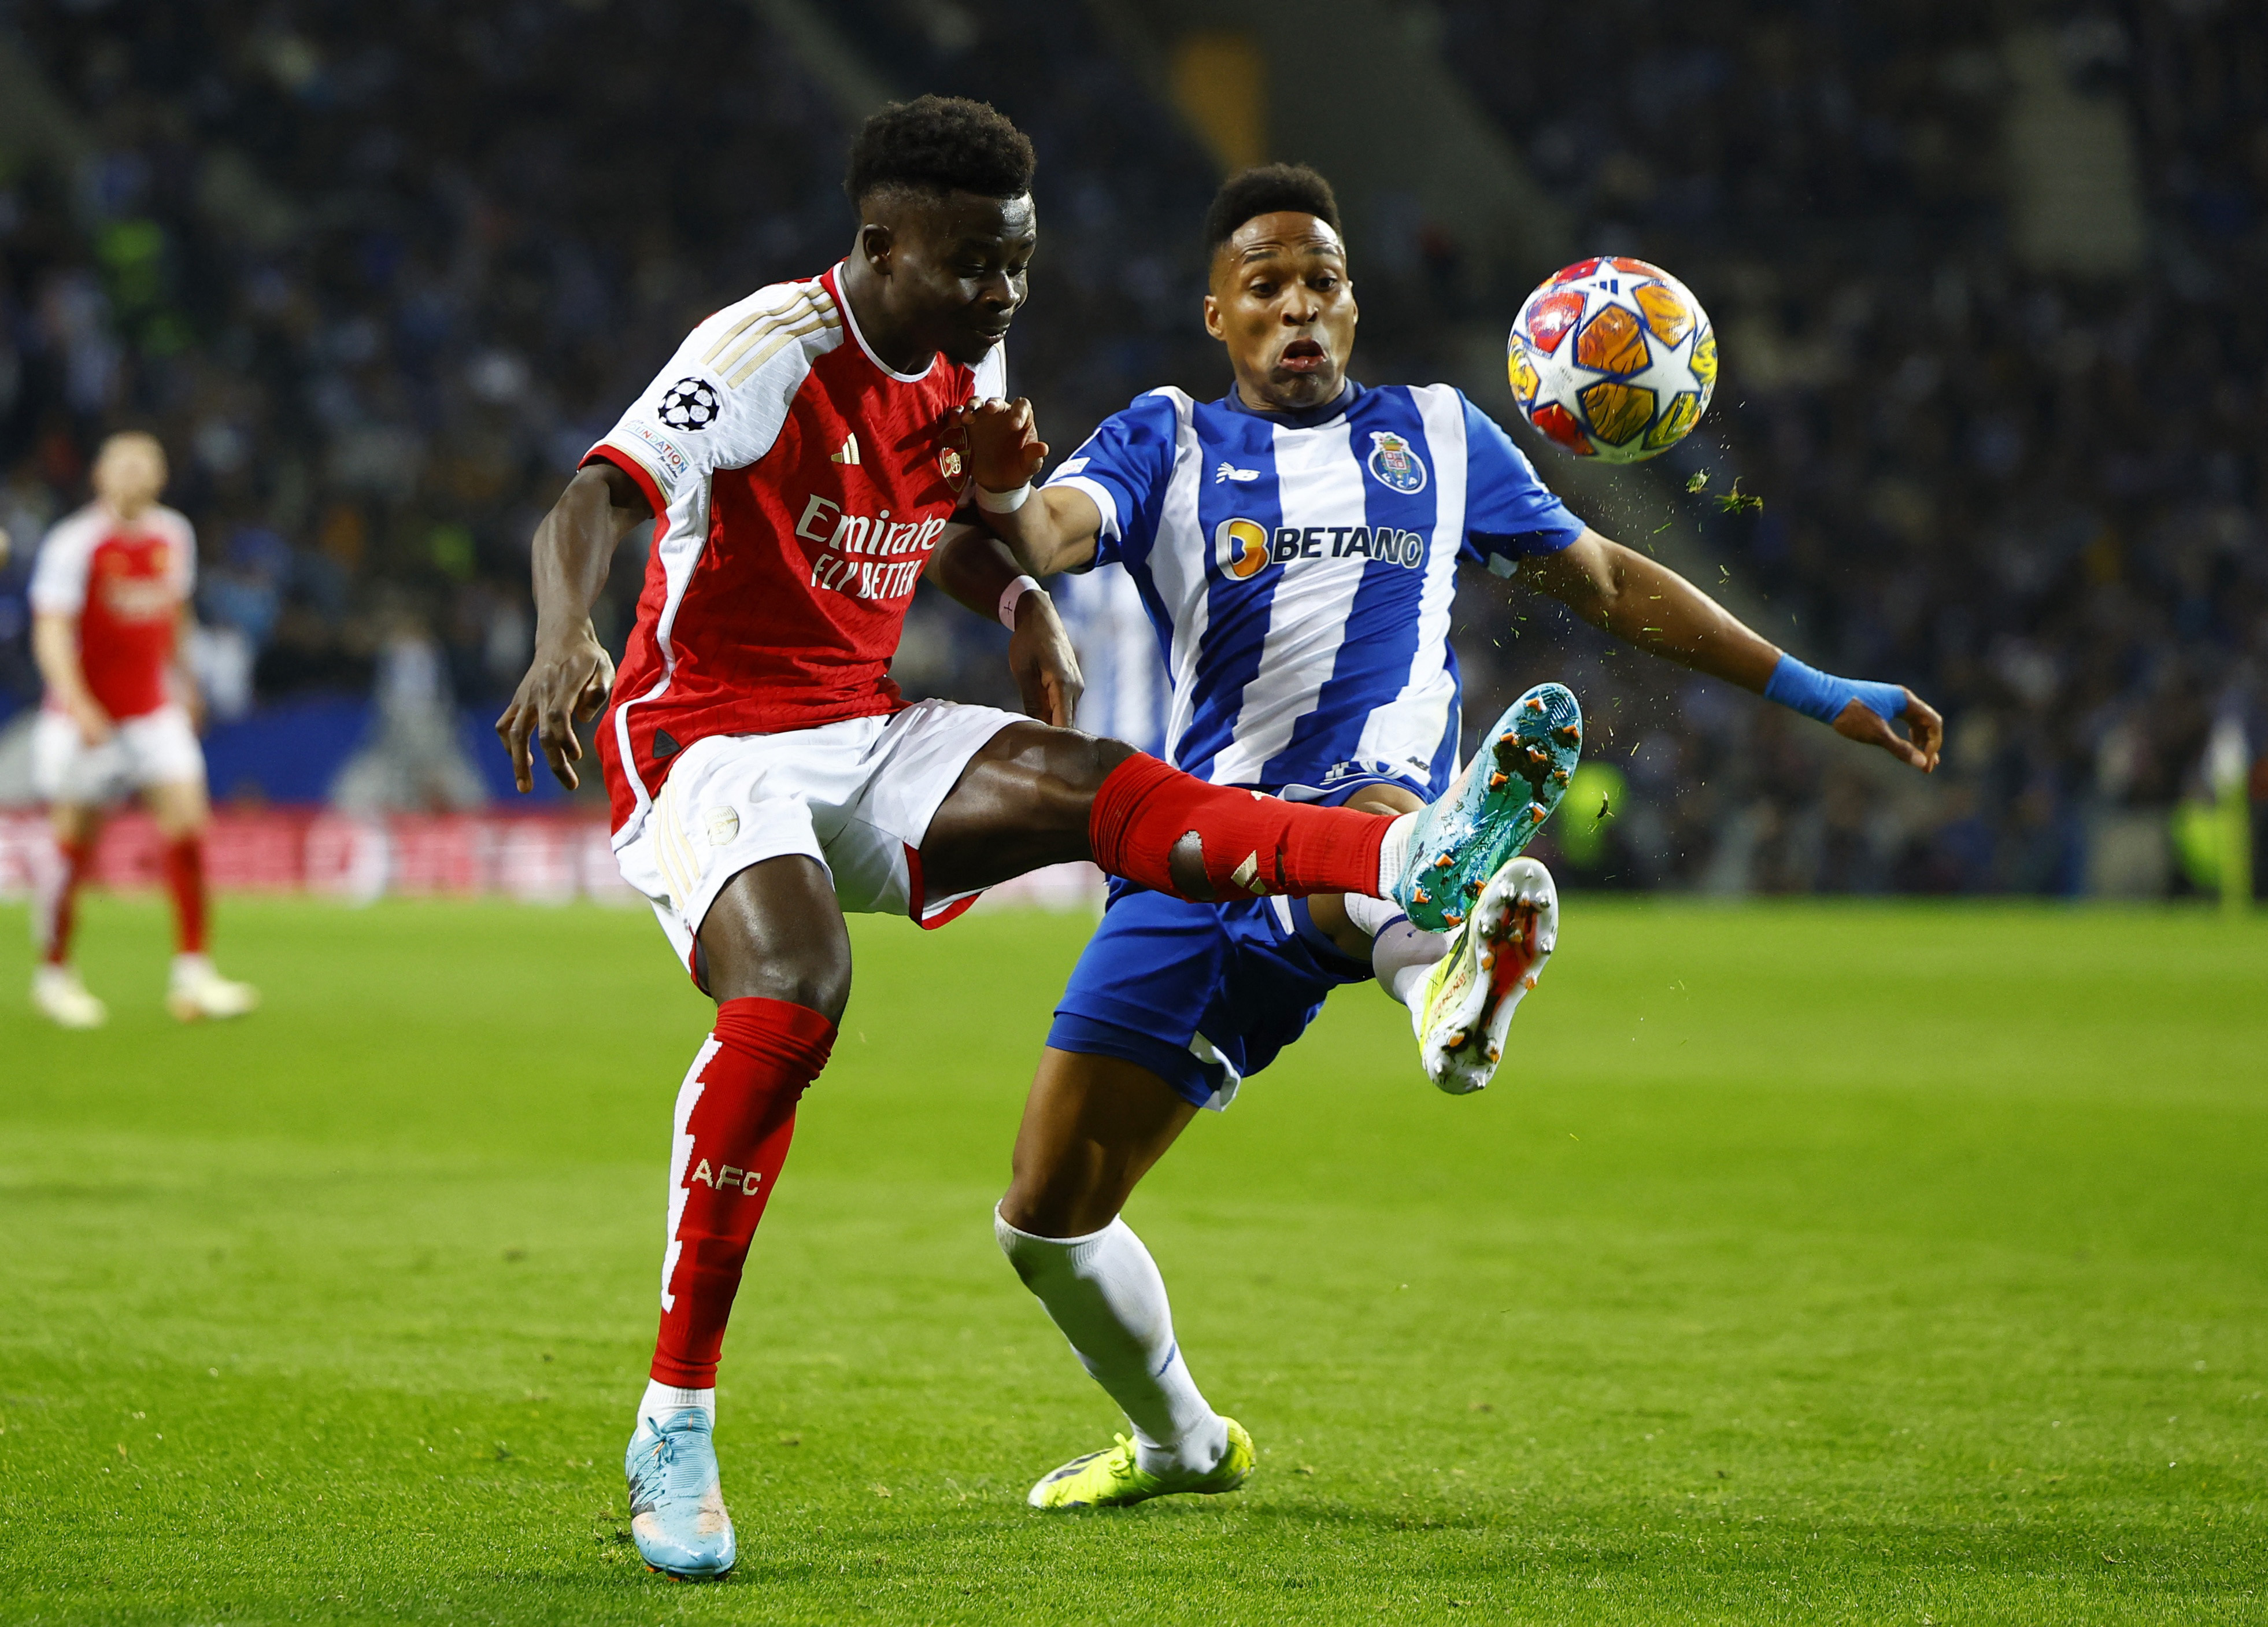 Galeno's late stunner gives Porto win over Arsenal